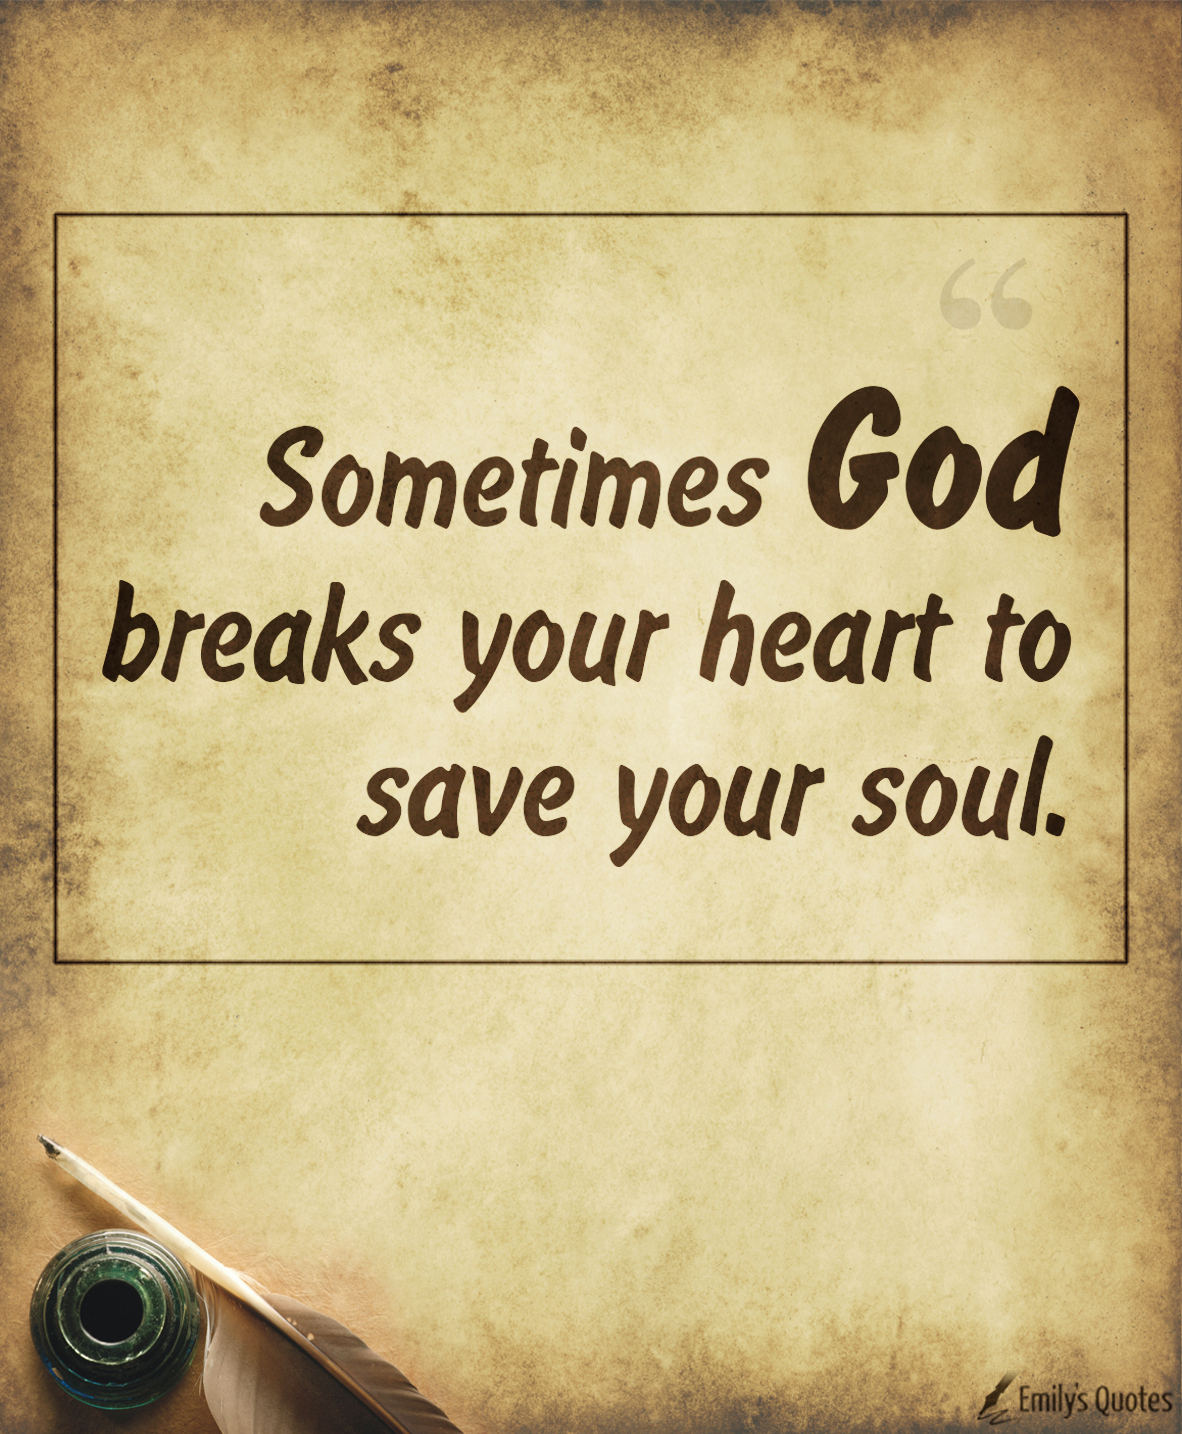 Sometimes God breaks your heart to save your soul